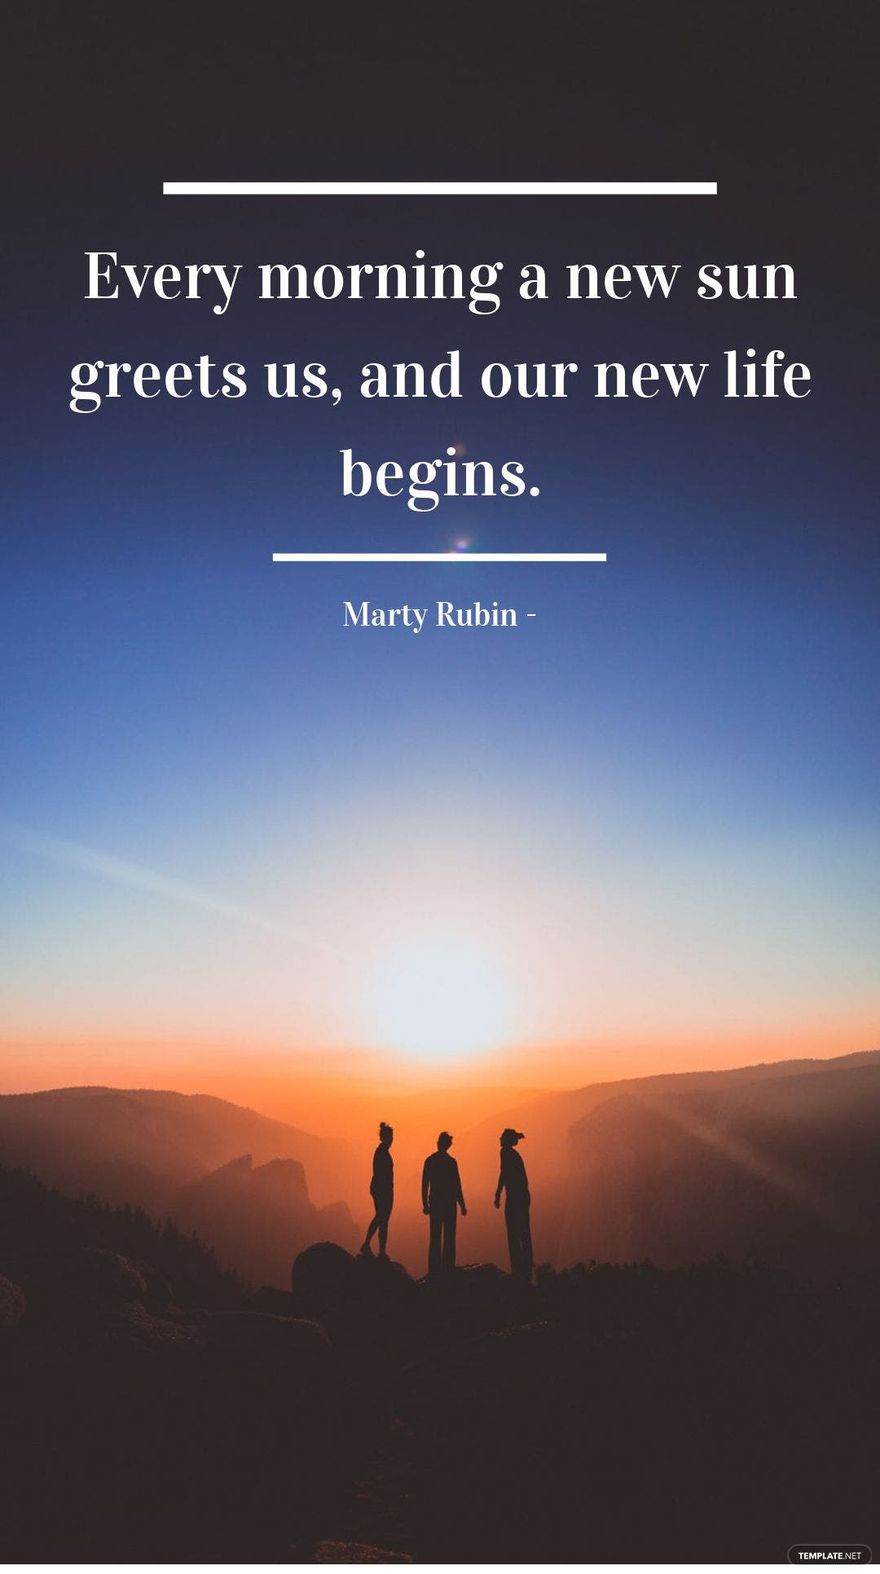 Marty Rubin - Every morning a new sun greets us, and our new life begins.